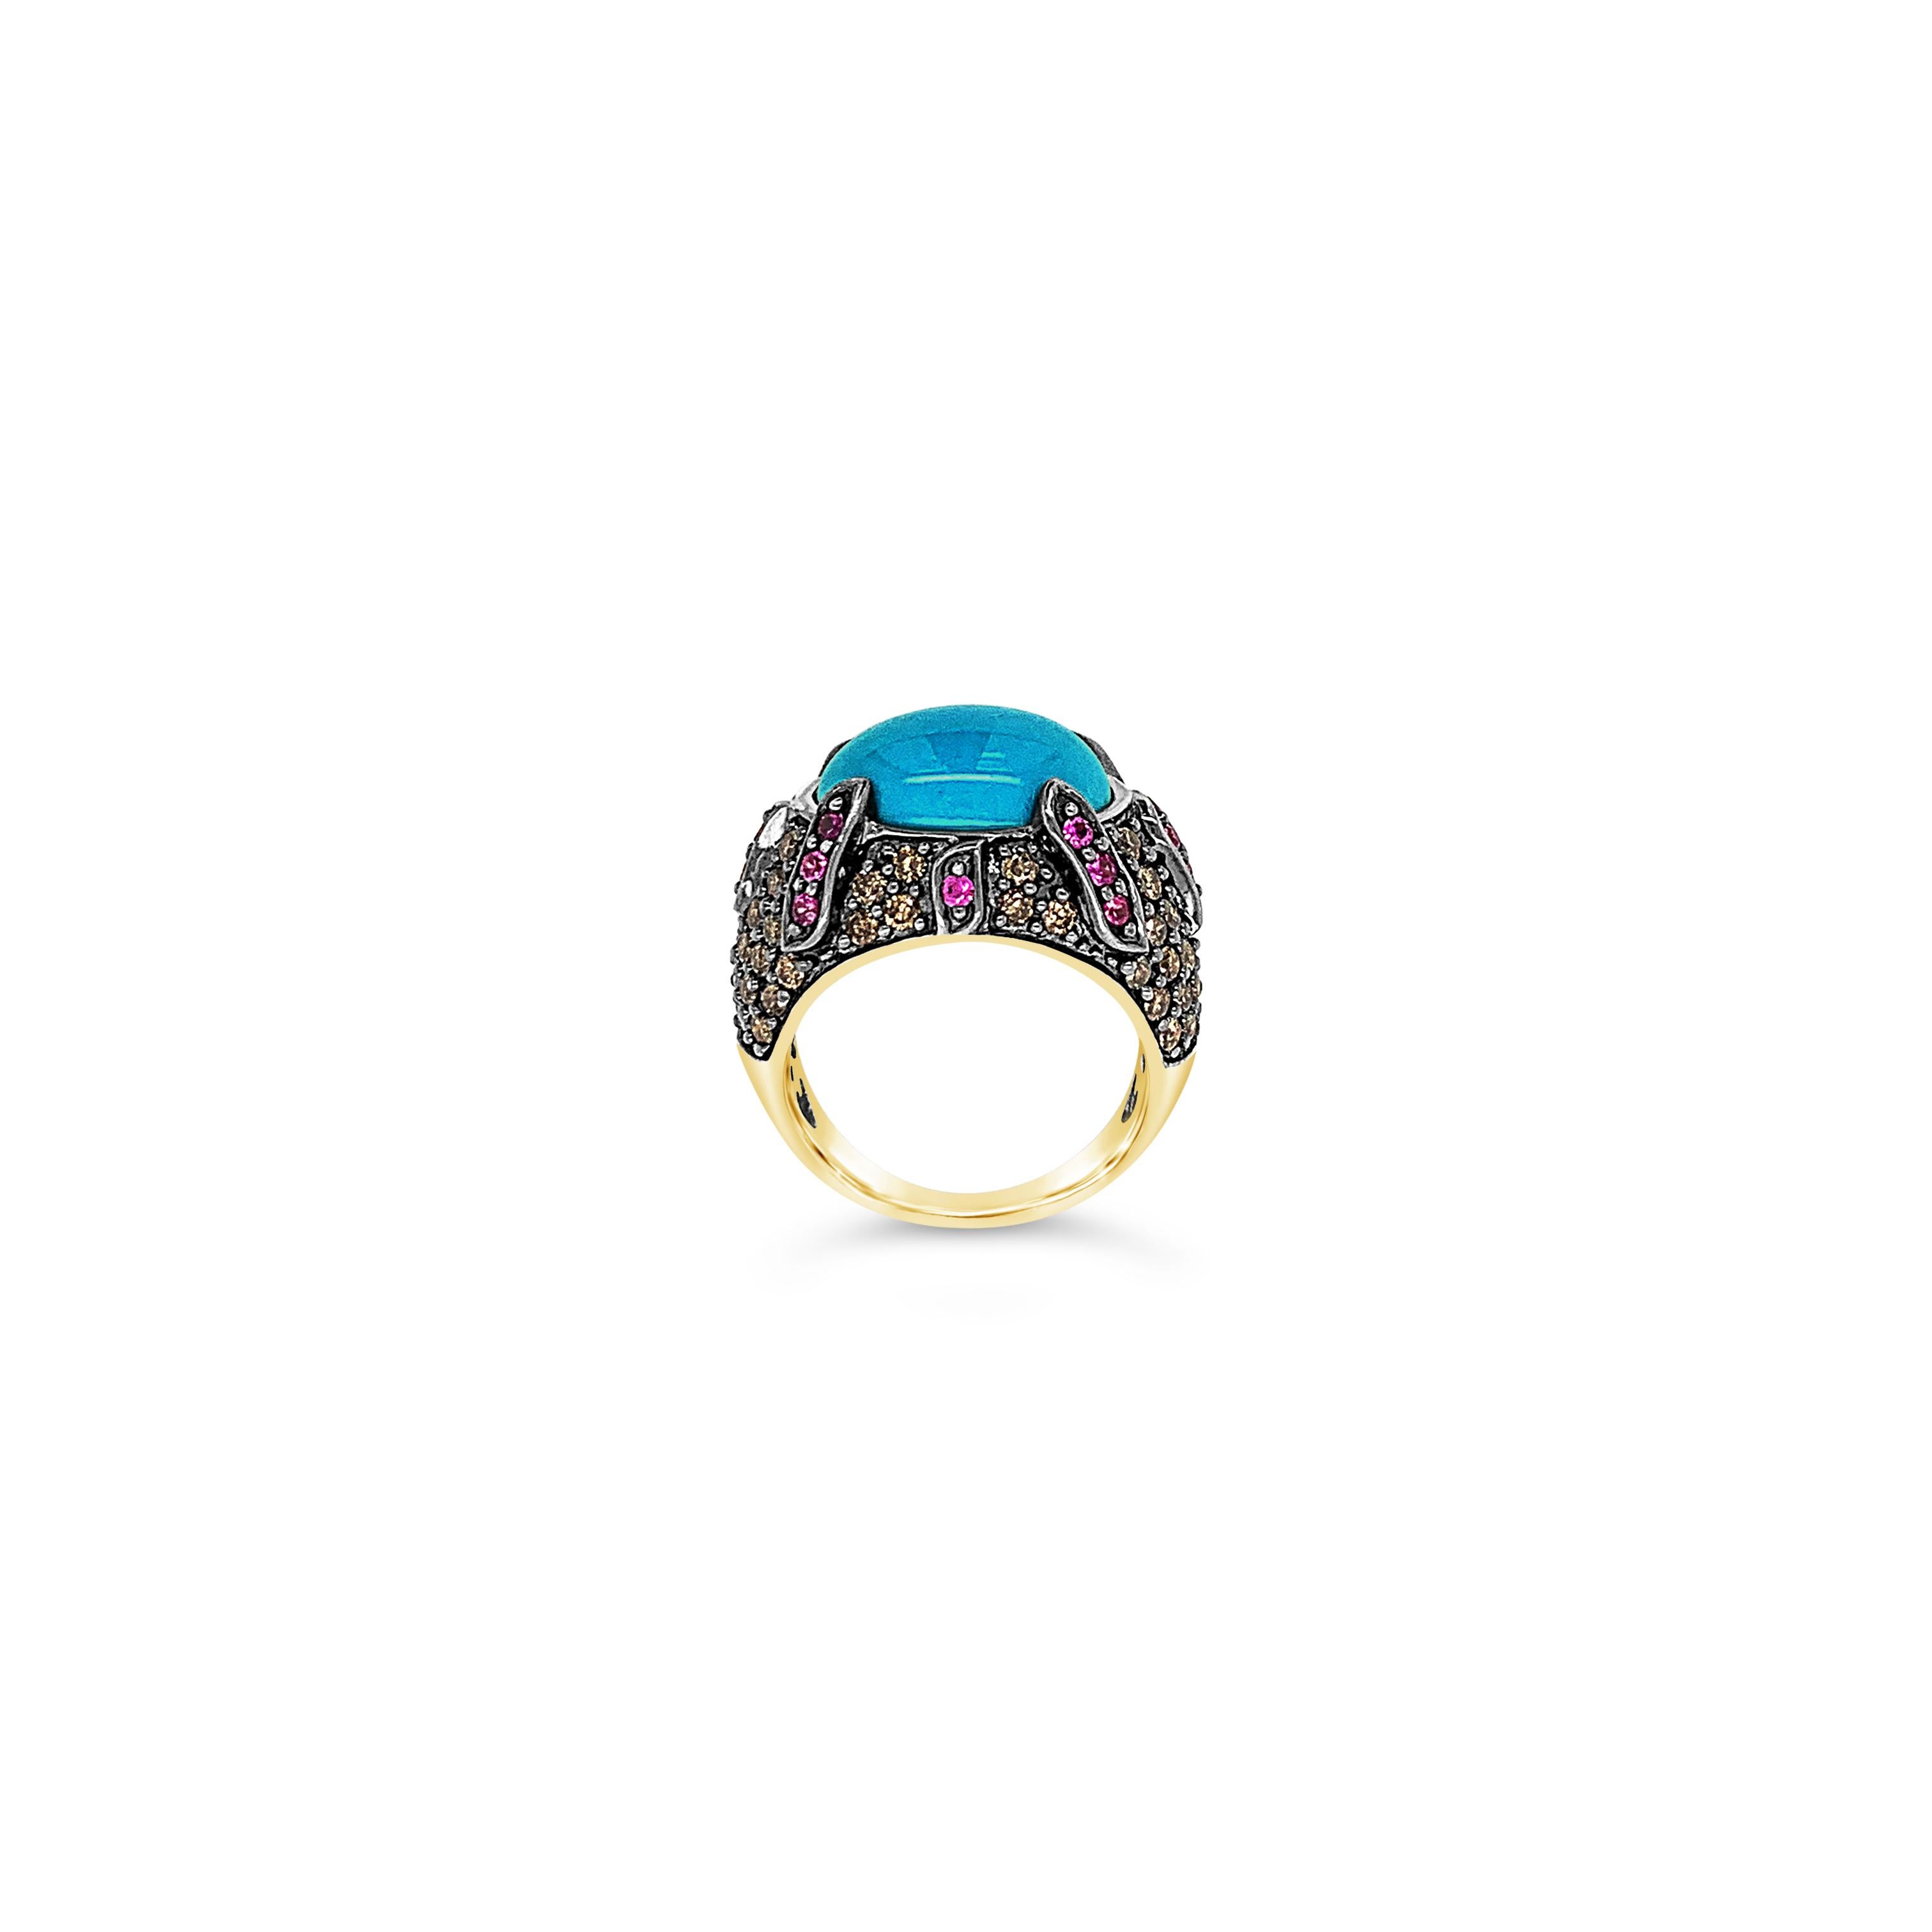 Carlo Viani® Ring featuring 5 3/4 cts. Robins Egg Blue Turquoise™, 1/3 cts. Bubble Gum Pink Sapphire™, 1 1/2 cts. Chocolate Diamonds® set in 14K Honey Gold™

Diamonds Breakdown:
1 1/2 cts Brown Diamonds

Gems Breakdown:
5 3/4 cts Turquoise
1/3 cts